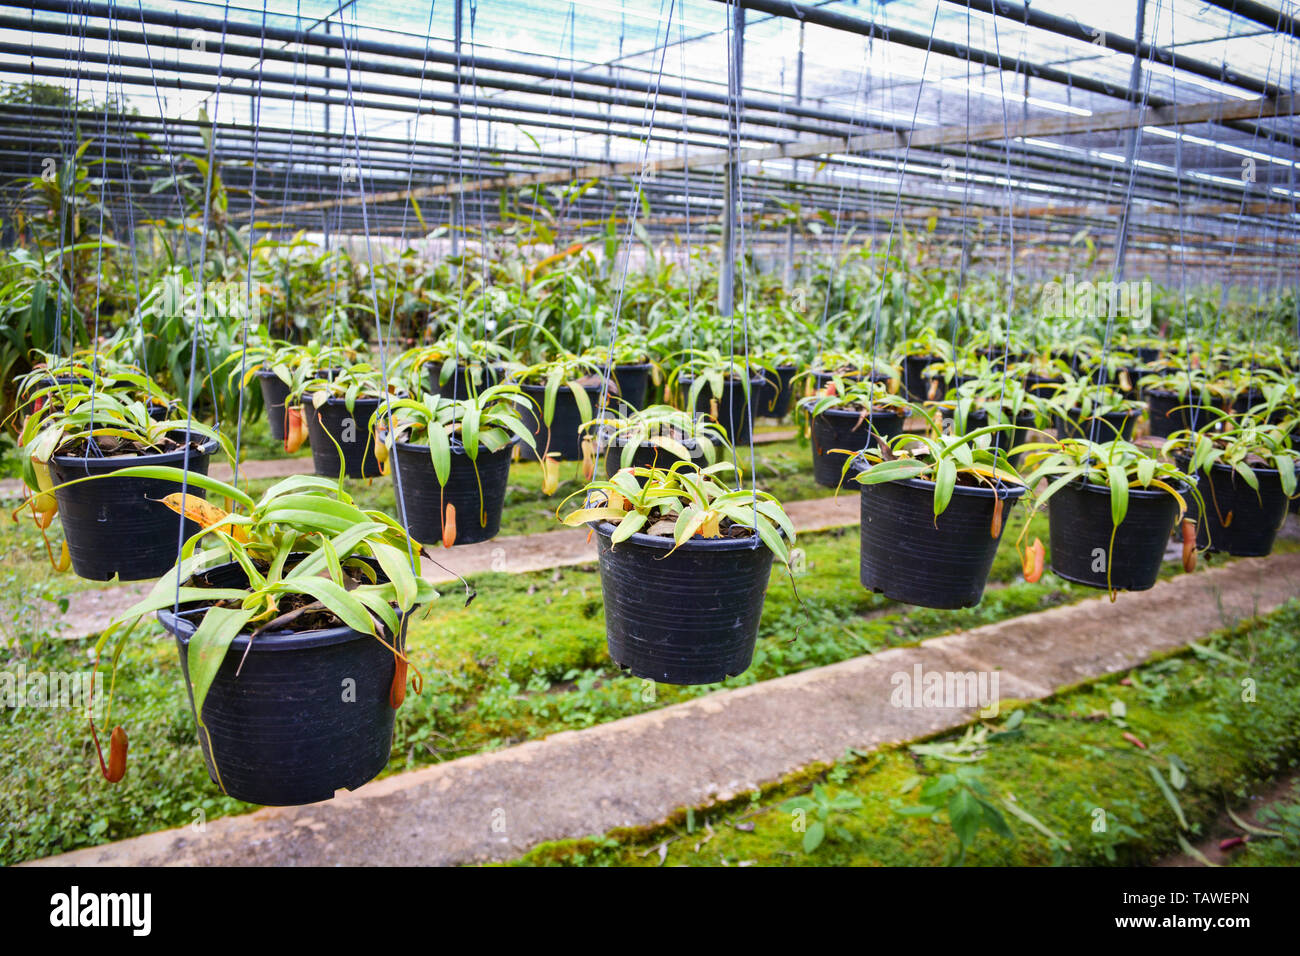 Orchid Nursery Farm Orchid Flower Plant Hang In The Garden Greenhouse Under Net Roof Stock Photo Alamy